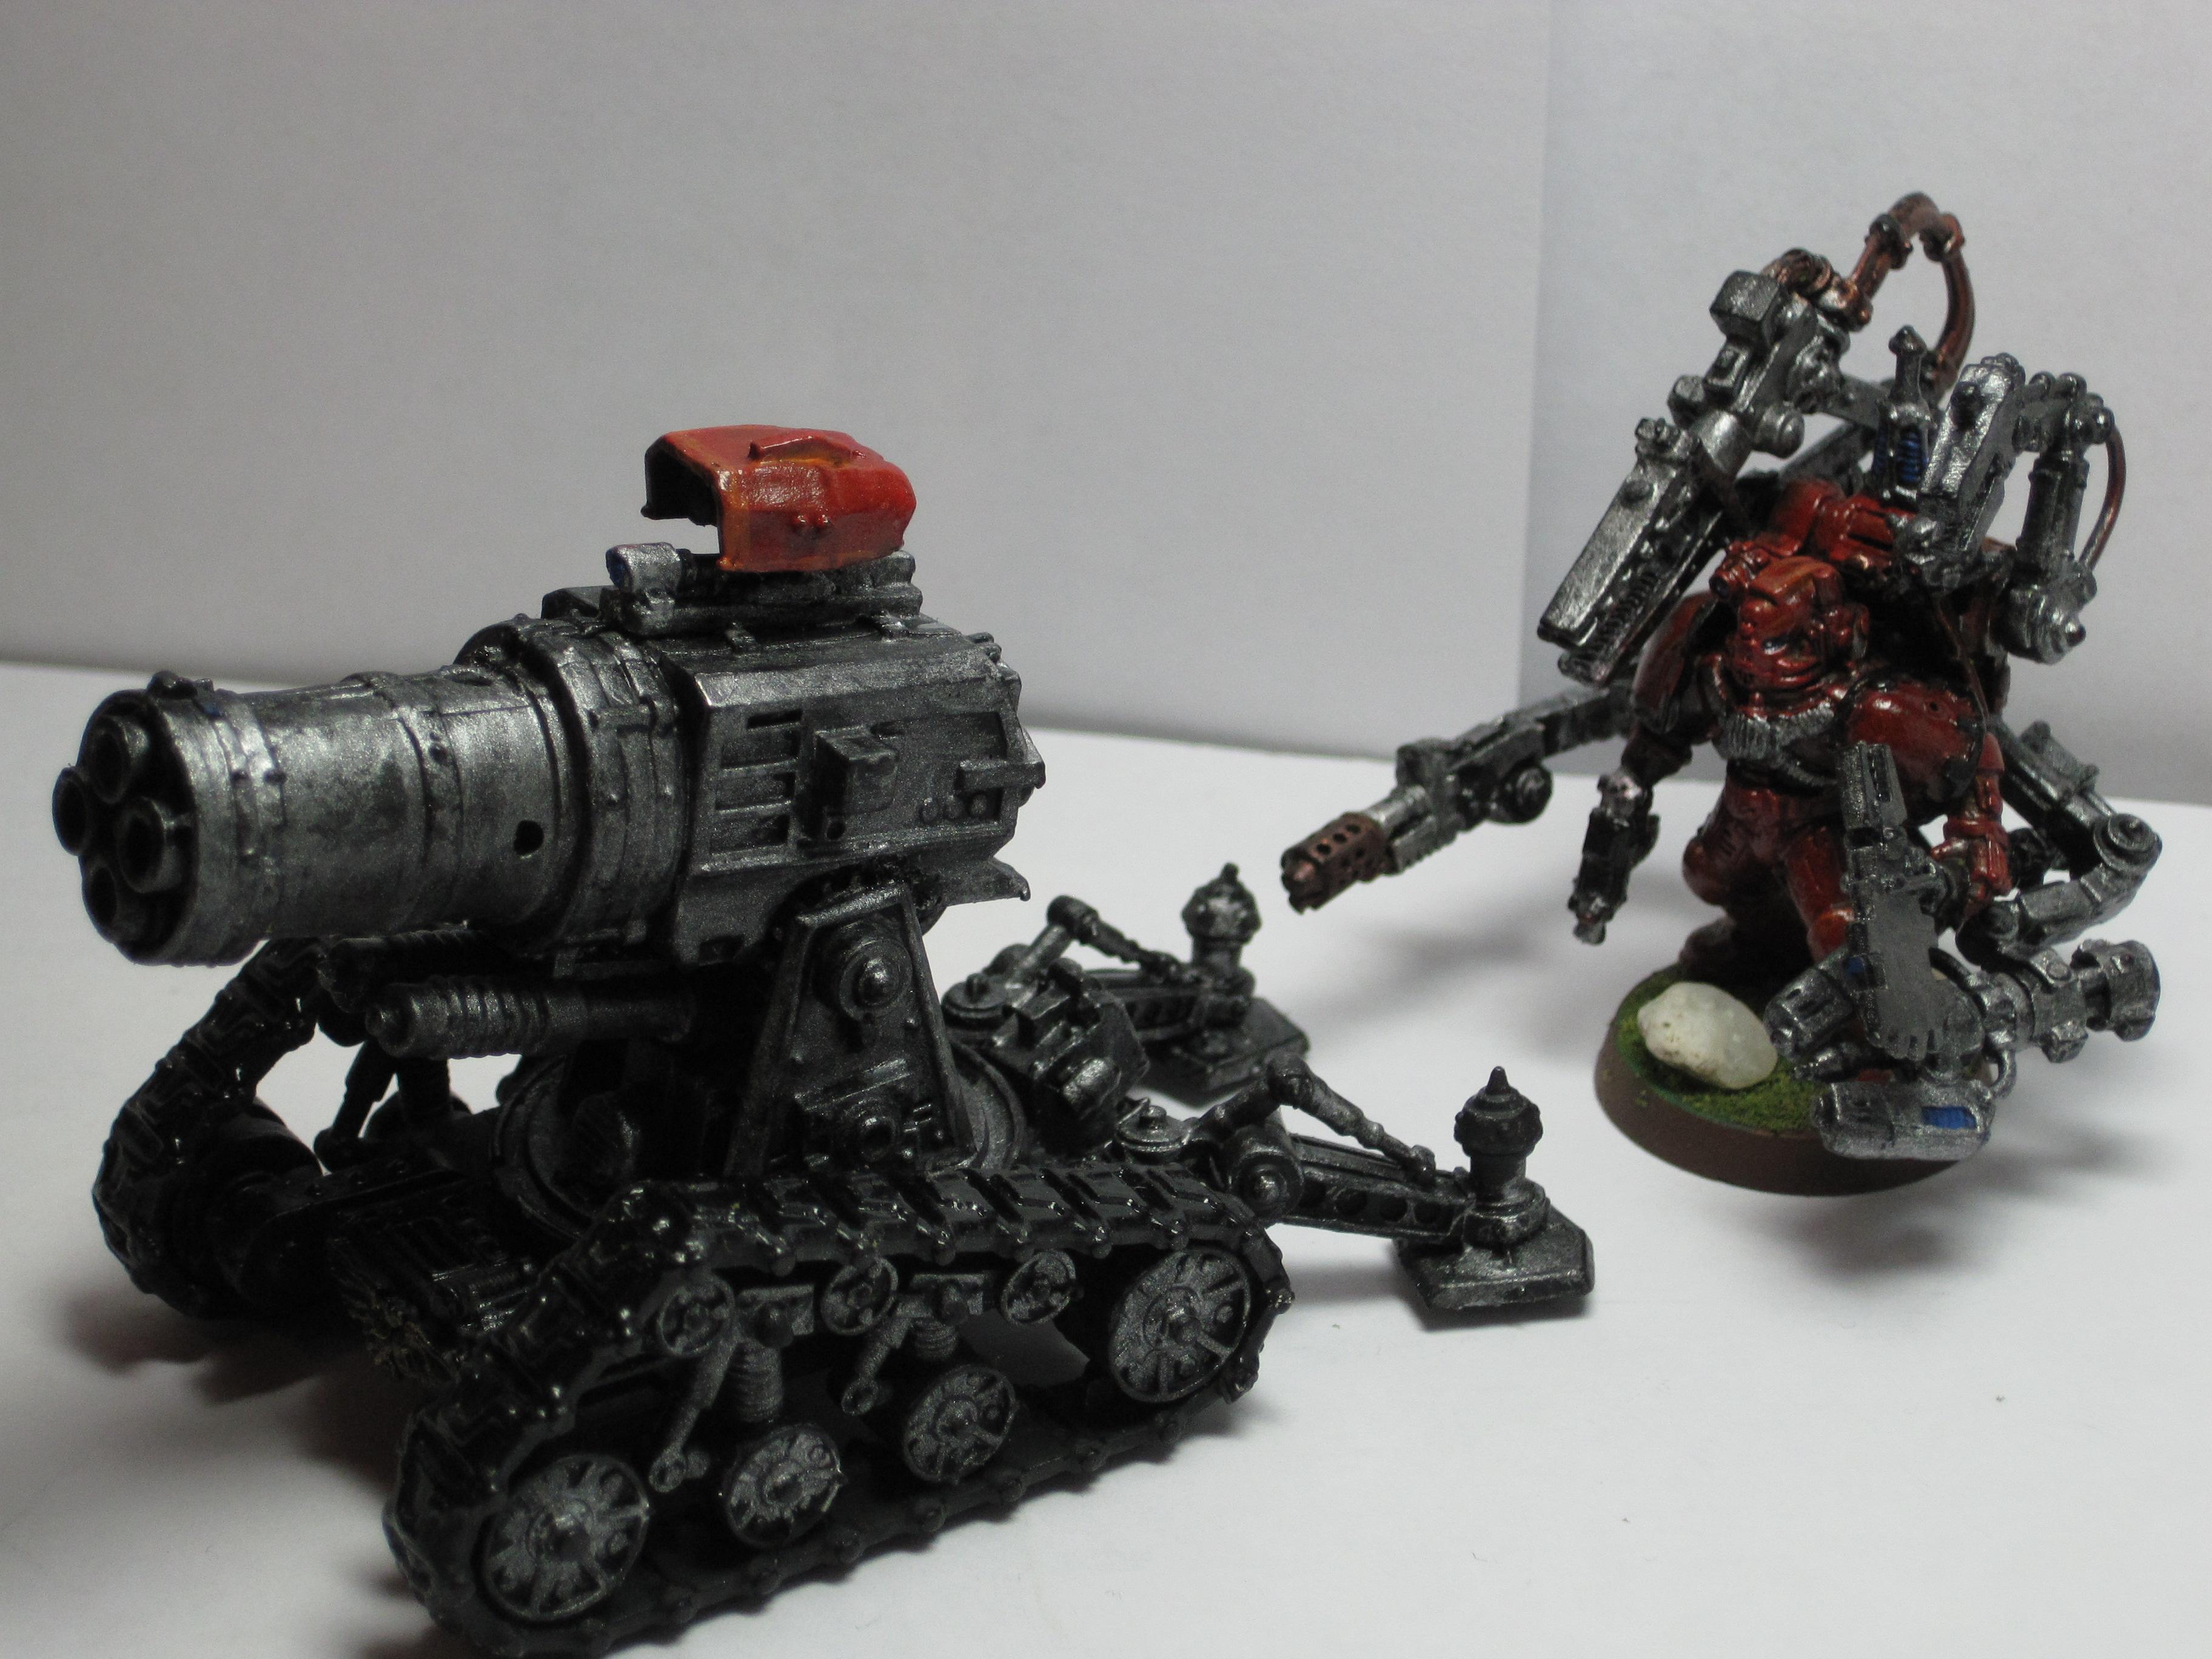 Home Brew, Land Speeder, My Old Army, Self Made Chapter, Space Marines, Techmarine, Thunderfire Cannon, Warhammer 40,000